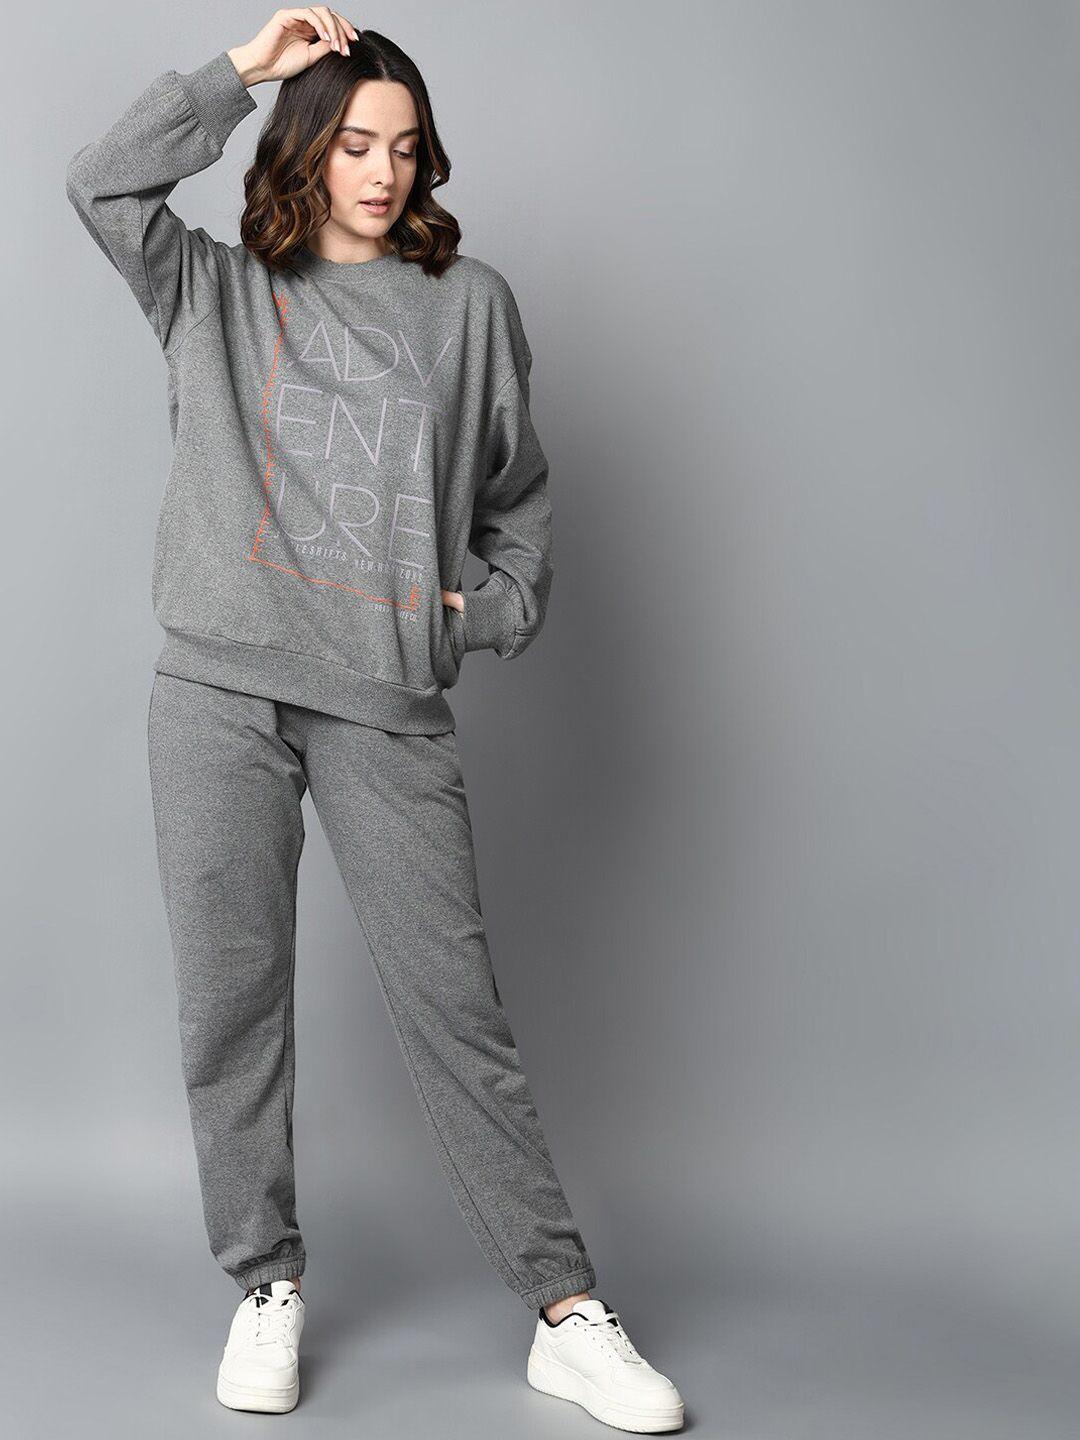 the roadster lifestyle co. grey printed round neck sweatshirt & joggers tracksuit